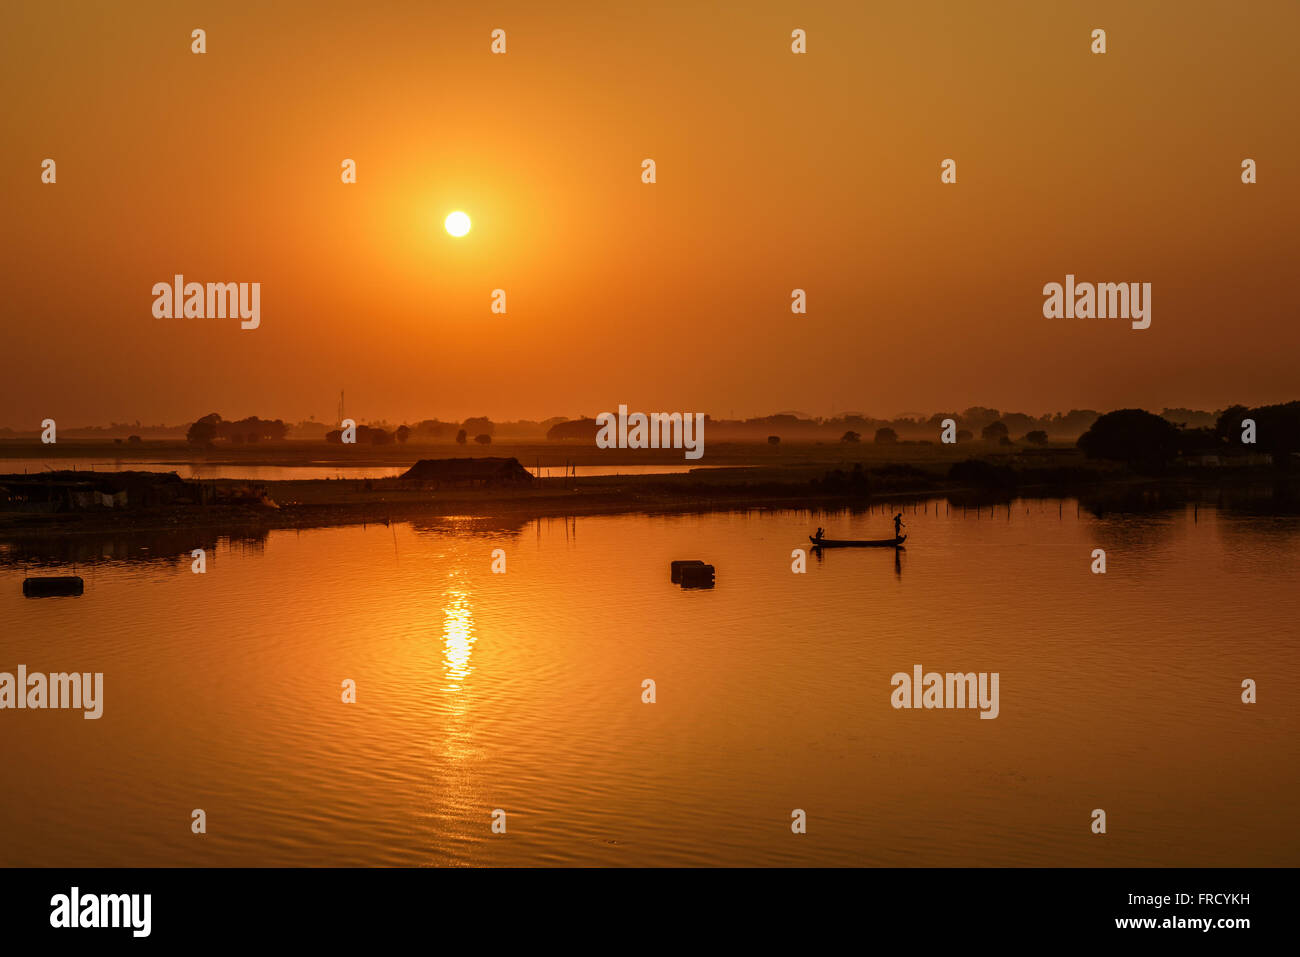 Sunset over the Taungthaman Lake with two fisherman silhouettes near Mandalay in Myanmar Stock Photo